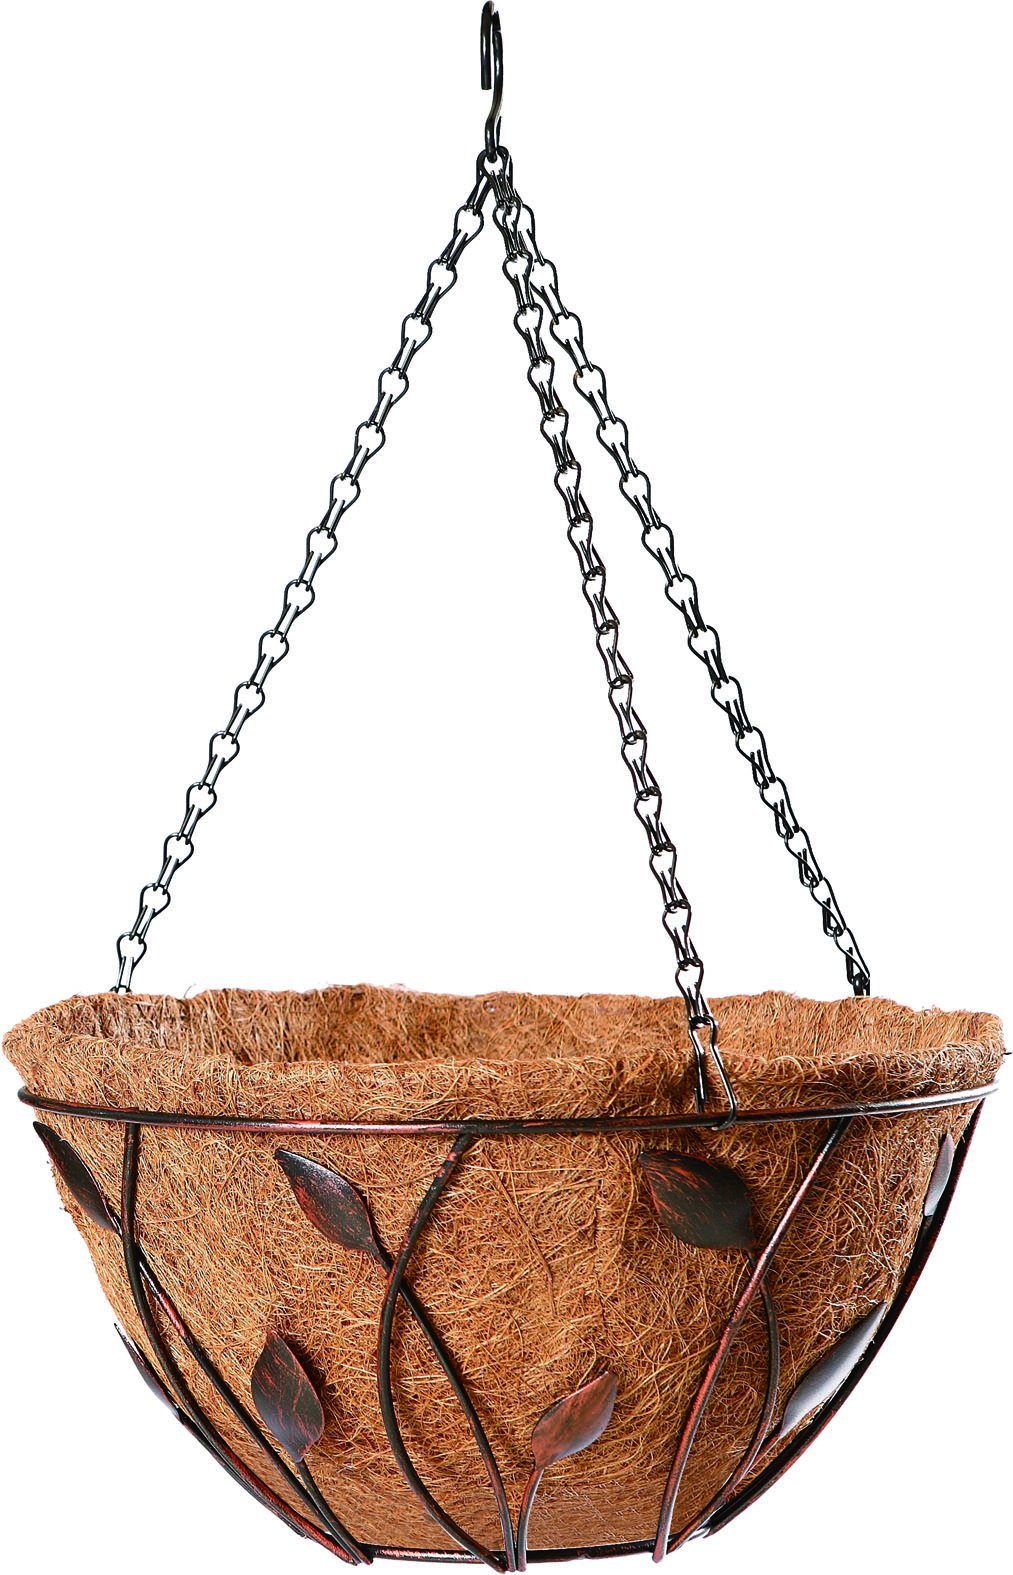 New Leaves-Shaped Garden Metal Hanging Basket with Chain and Coco Liner (2 sizes)